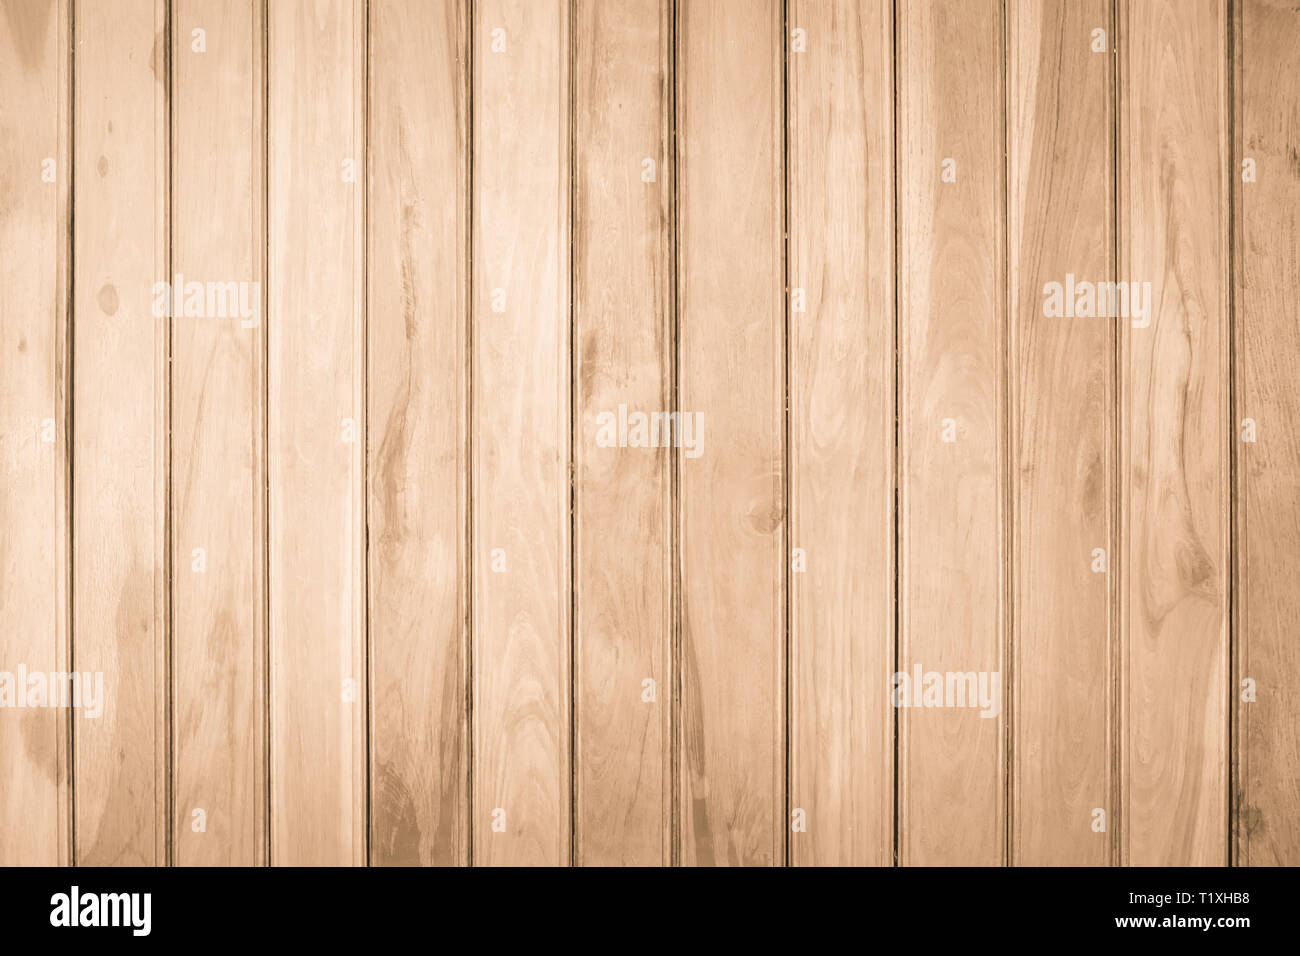 Wood plank brown texture background. wooden wall all antique cracking furniture painted weathered white vintage peeling wallpaper. Plywood or woodwork Stock Photo